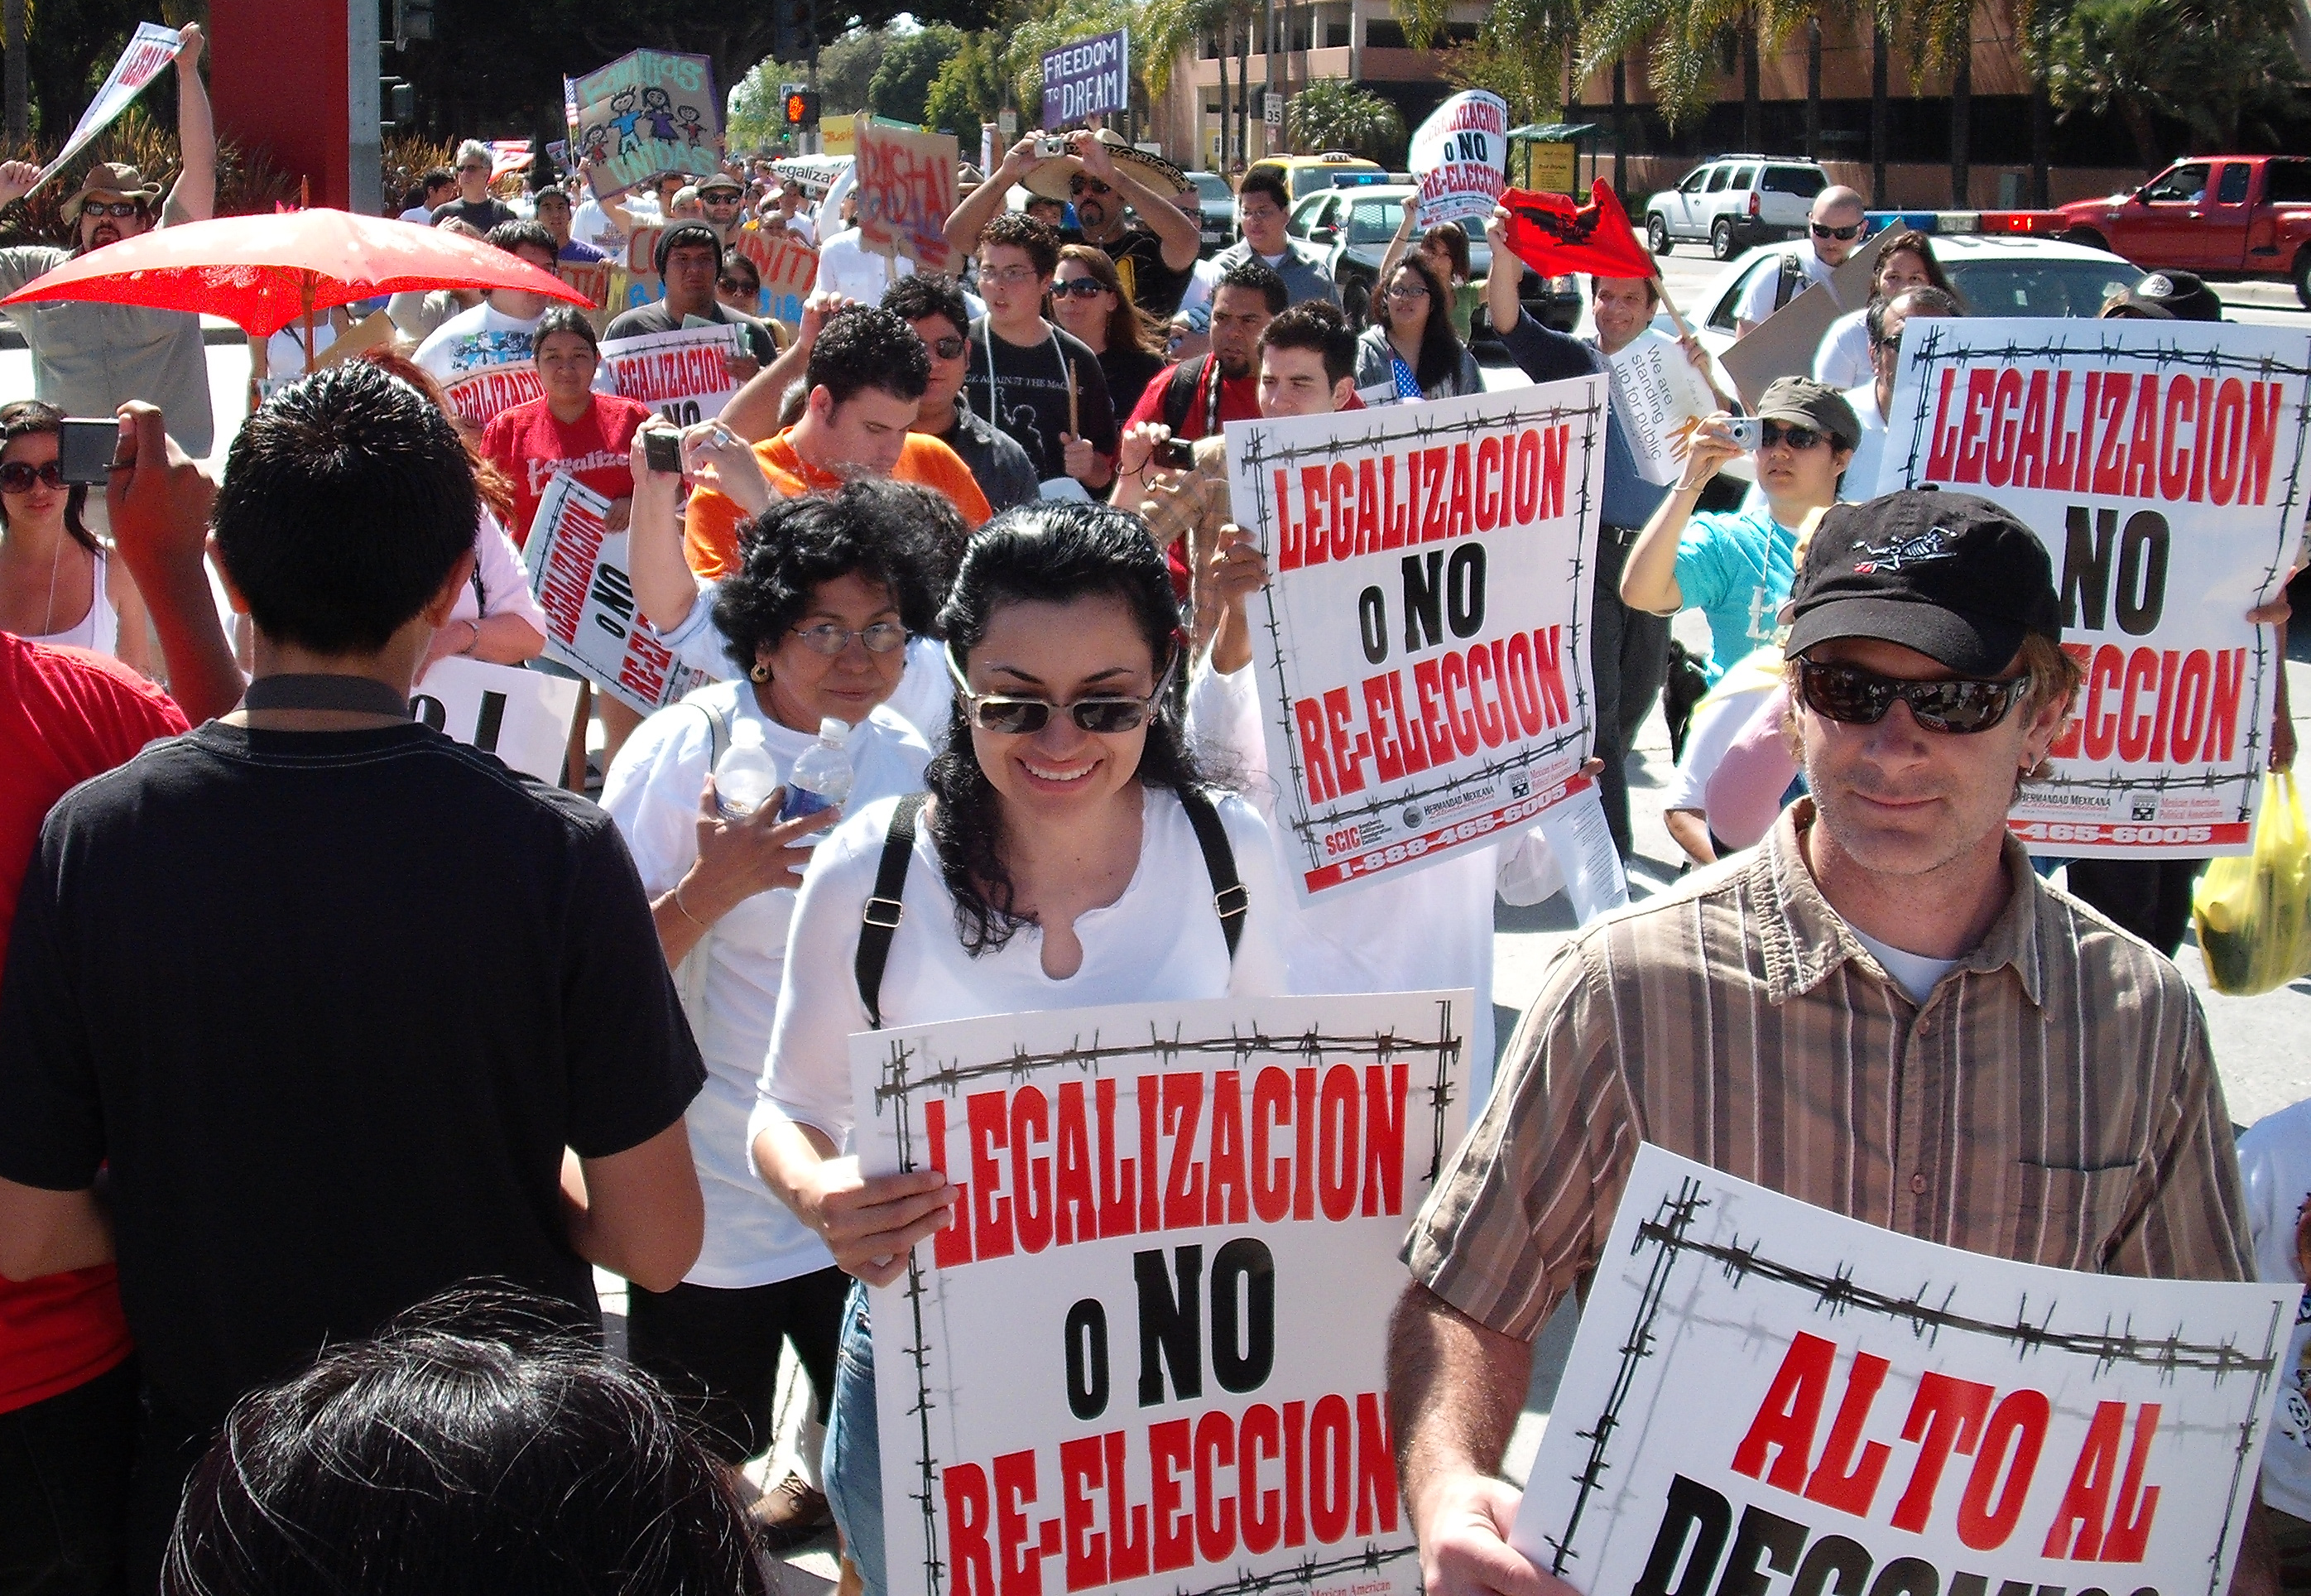 May Day March in Downtown Santa Ana Attracts an Estimated 1,000 People ...